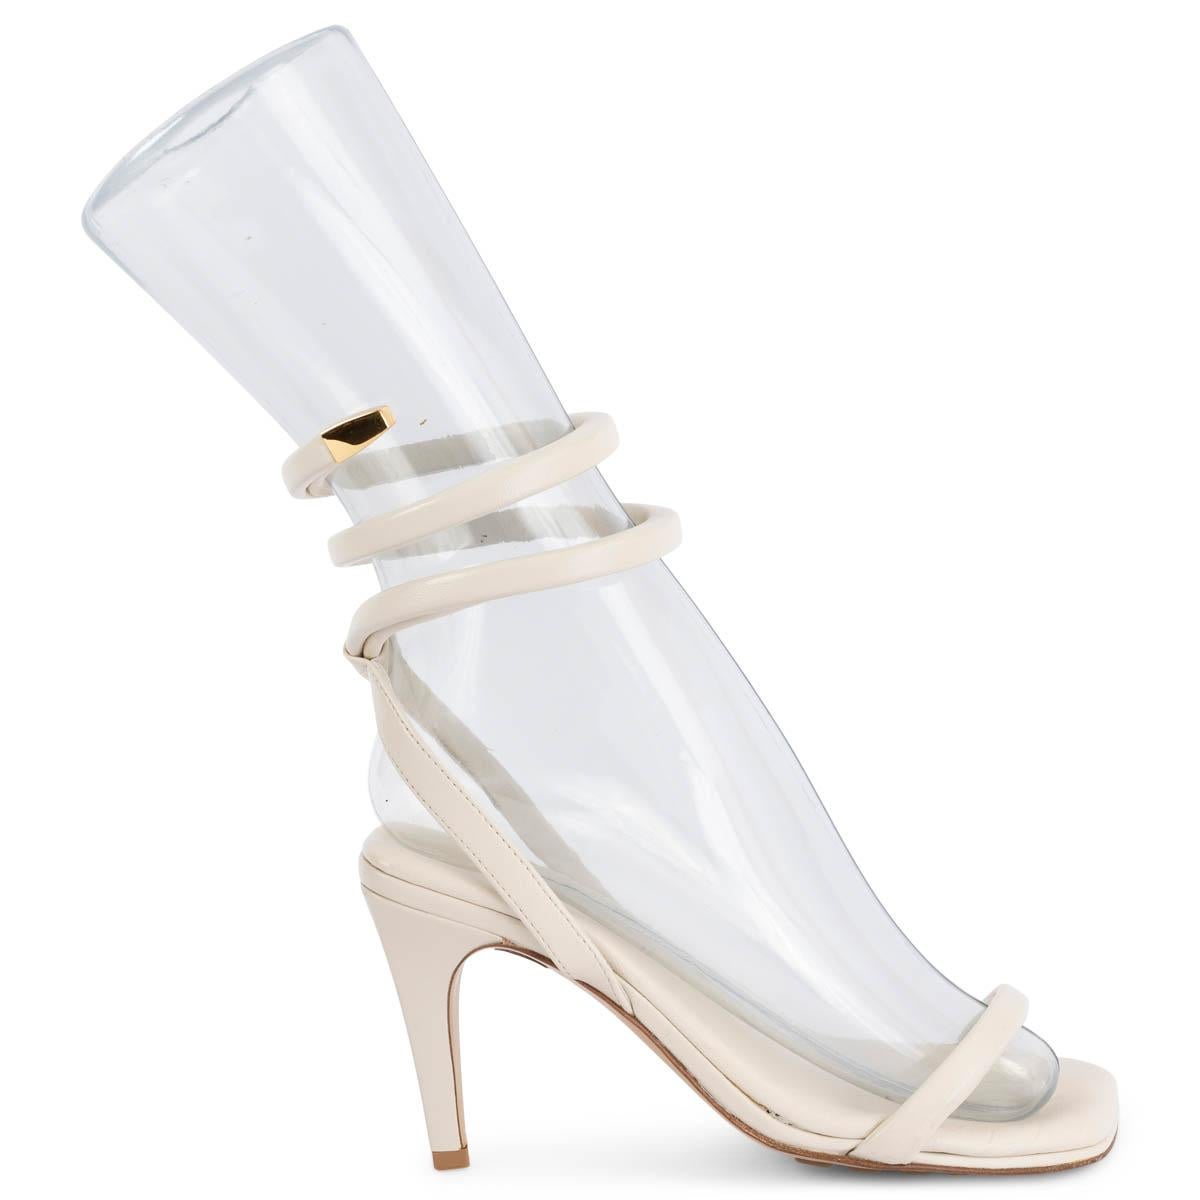 100% authentic Bottega Veneta Spiral sandals in ivory leather. Featuring a slingback with coiled ankle strap and gold-tone metal tip and a single strap over the toes. Rubber-injected leather soles for comfort and stability. Have been worn and show